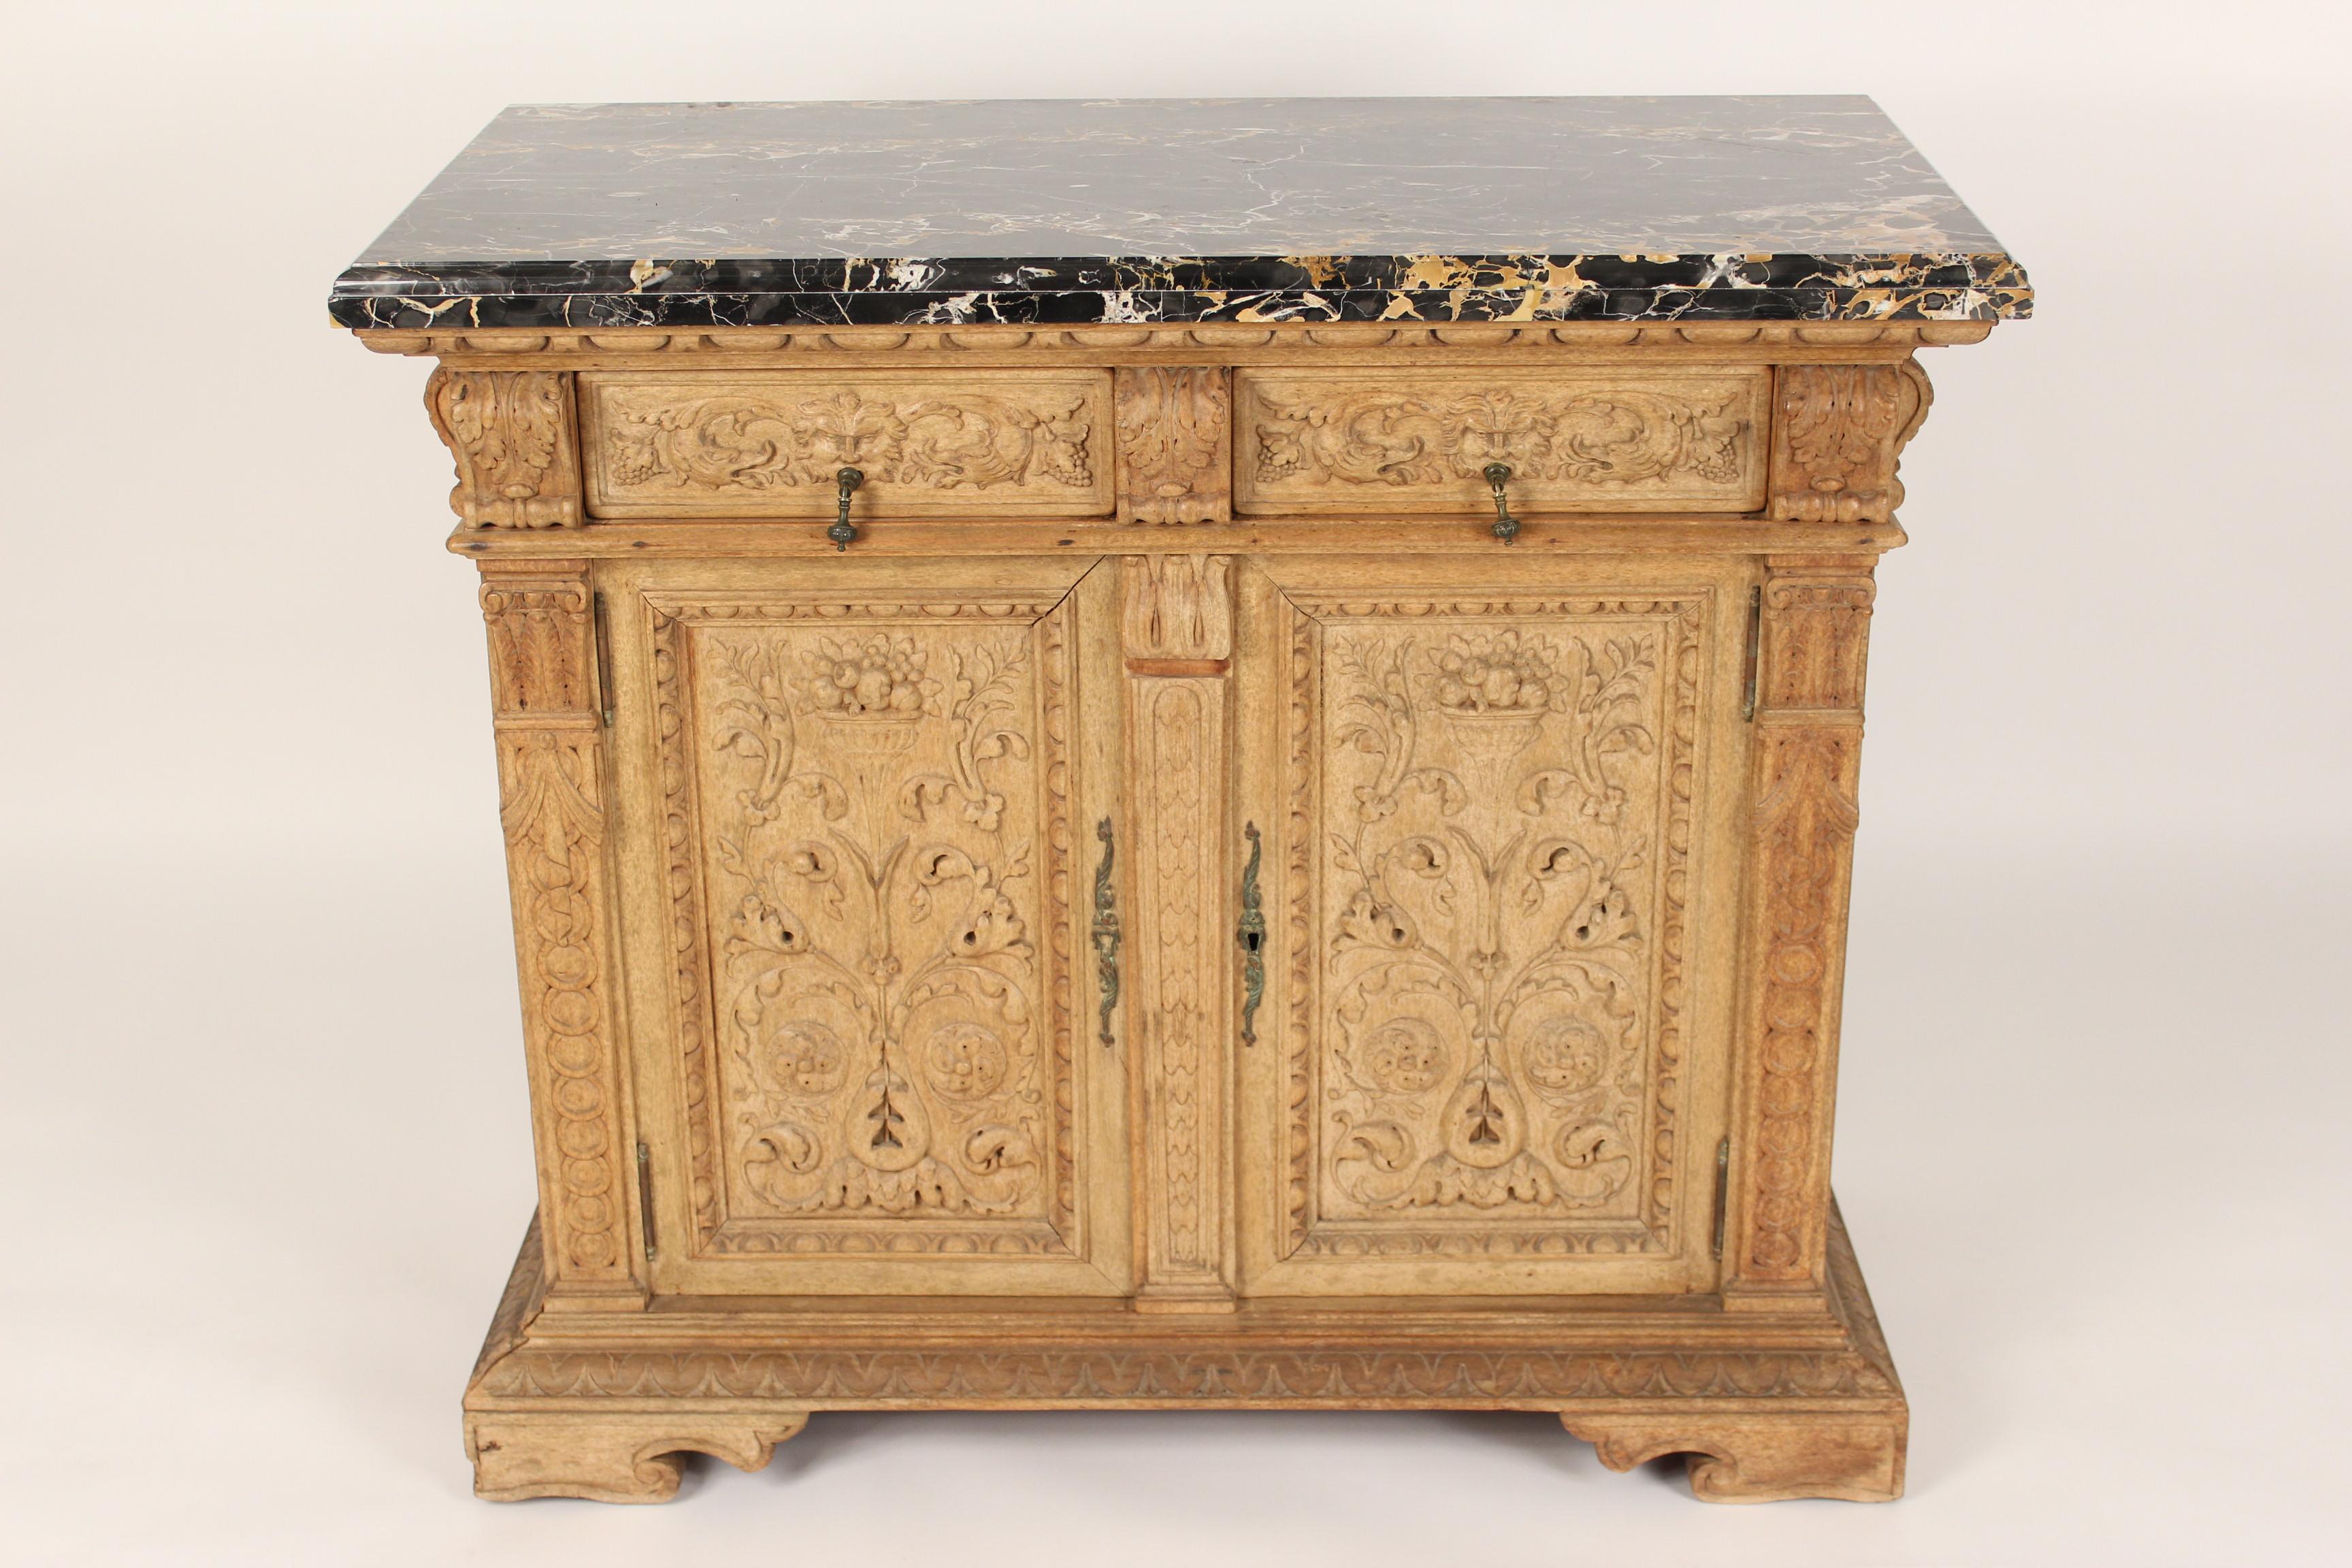 Renaissance style carved bleached walnut credenza with marble top, circa 1920's. The drawers have dolphin and north face carvings, flanked by acanthus carved volutes. The doors have floral and vase carvings. Drawers have dove tail construction.